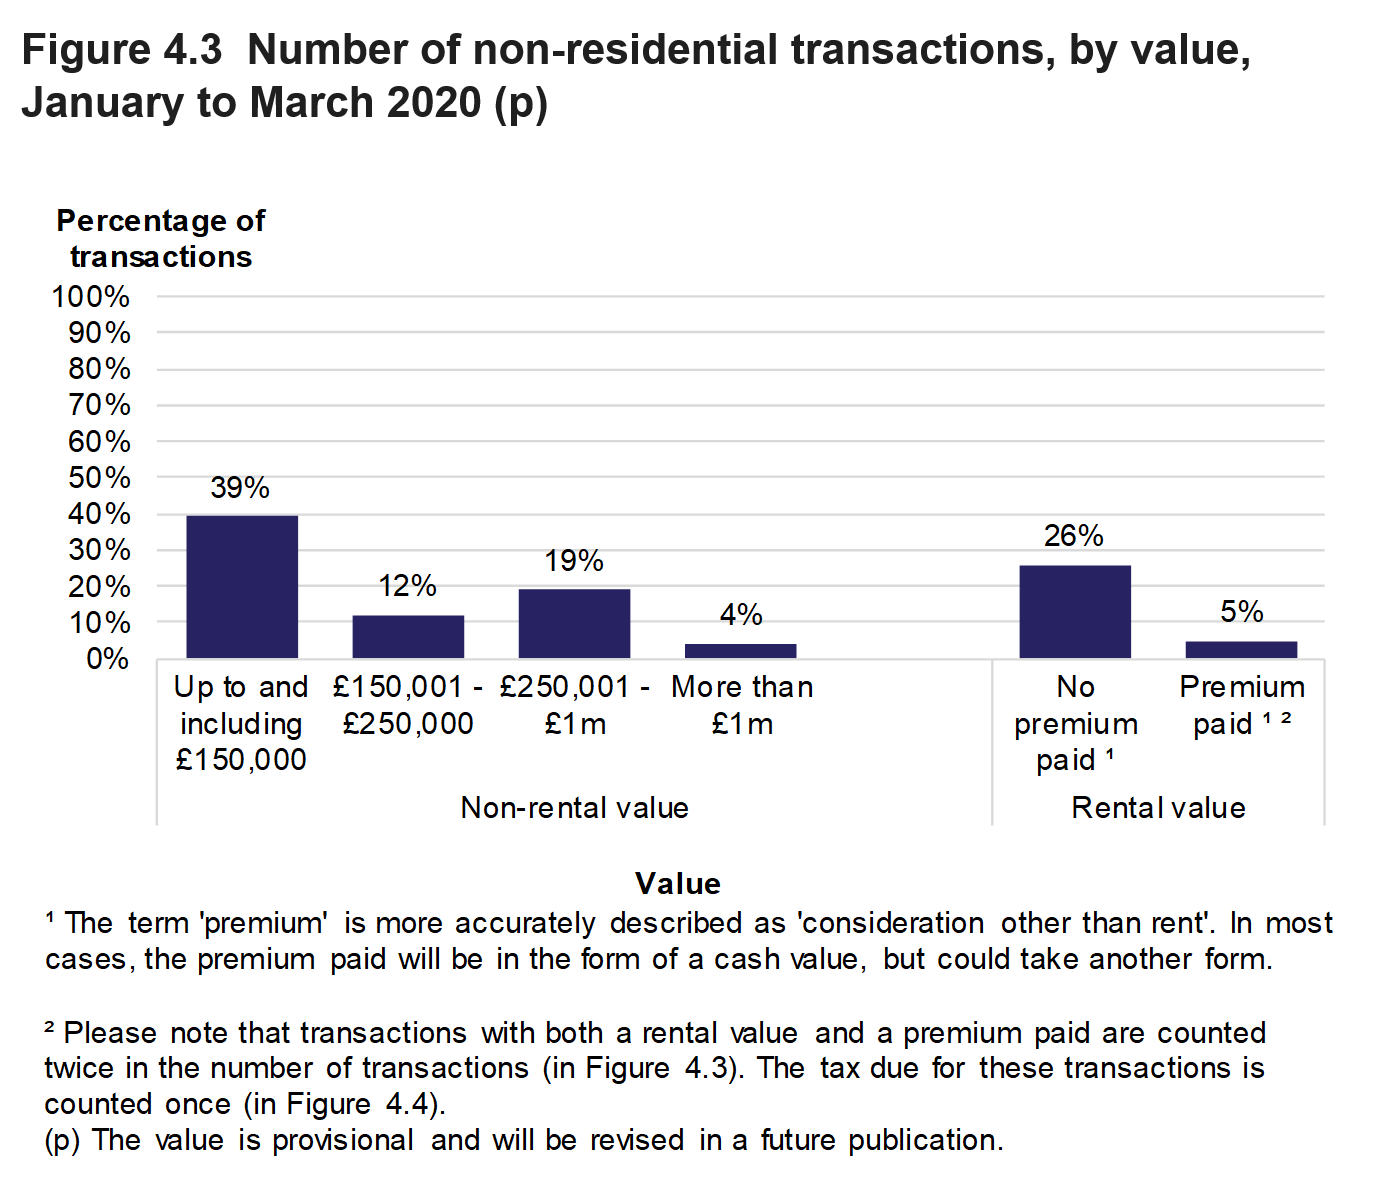 Figure 4.3 shows the number of non-residential transactions by value of the property. Data is presented as the percentage of transactions and relates to transactions effective in January to March 2020.